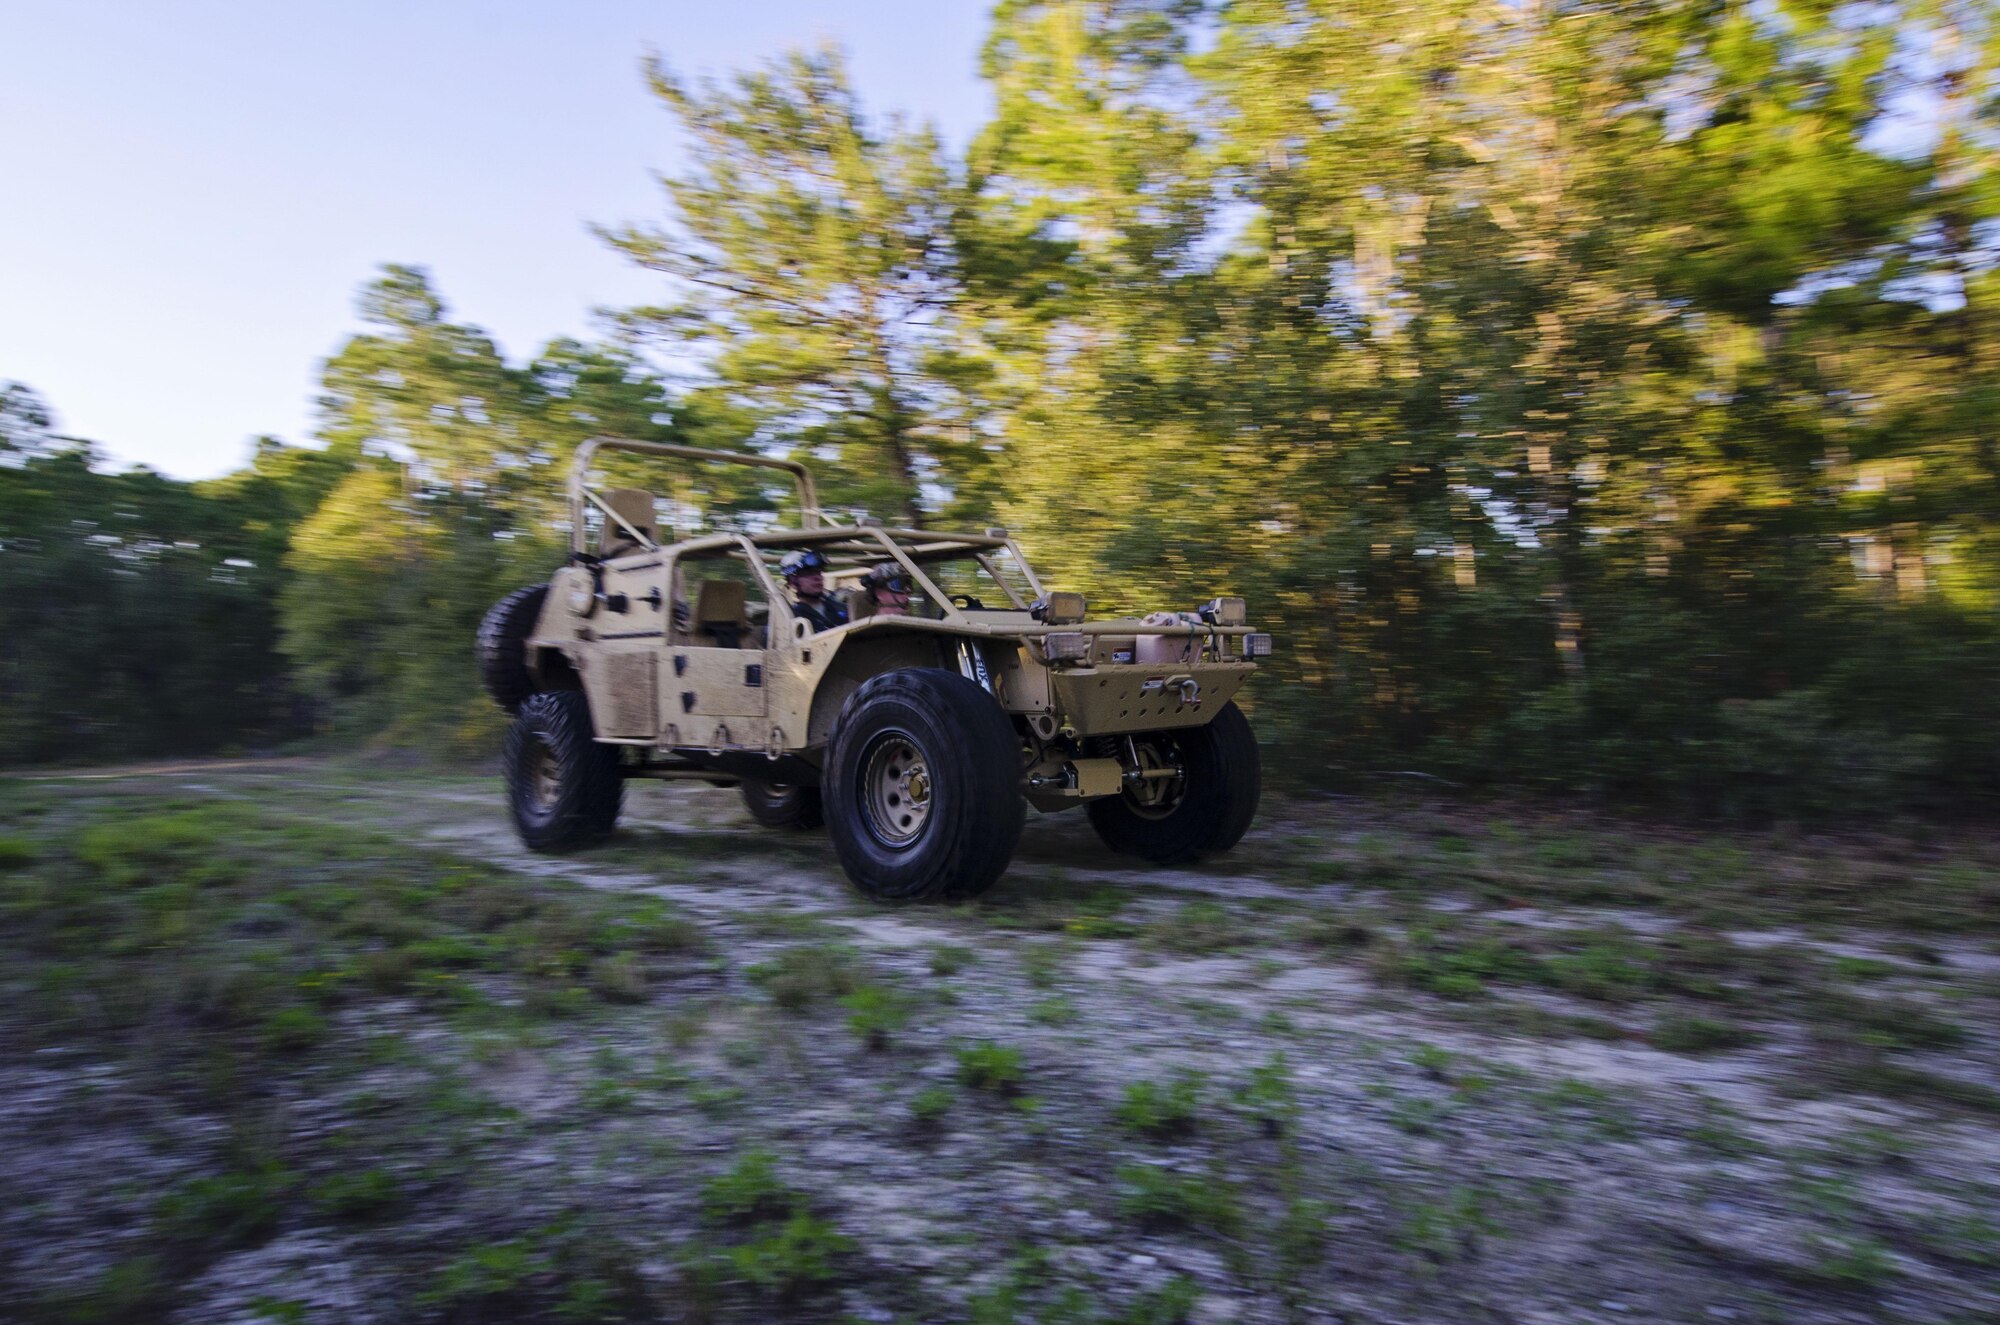 The driver of a Guardian Angel Air Deployable Rescue Vehicle drives on the off-road trail while rescuing simulated escaped prisoners of war in the swamps at Naval Air Station Pensacola, Fla., April 2, 2016. Reservists from Dover Air Force Base, Del., in the 512th Airlift Wing's 709th Airlift Squadron, conducted an off-station training exercise, March 29 through April 3, to ensure they are current in all their deployment requirements. (U.S. Air Force photo/Capt. Bernie Kale